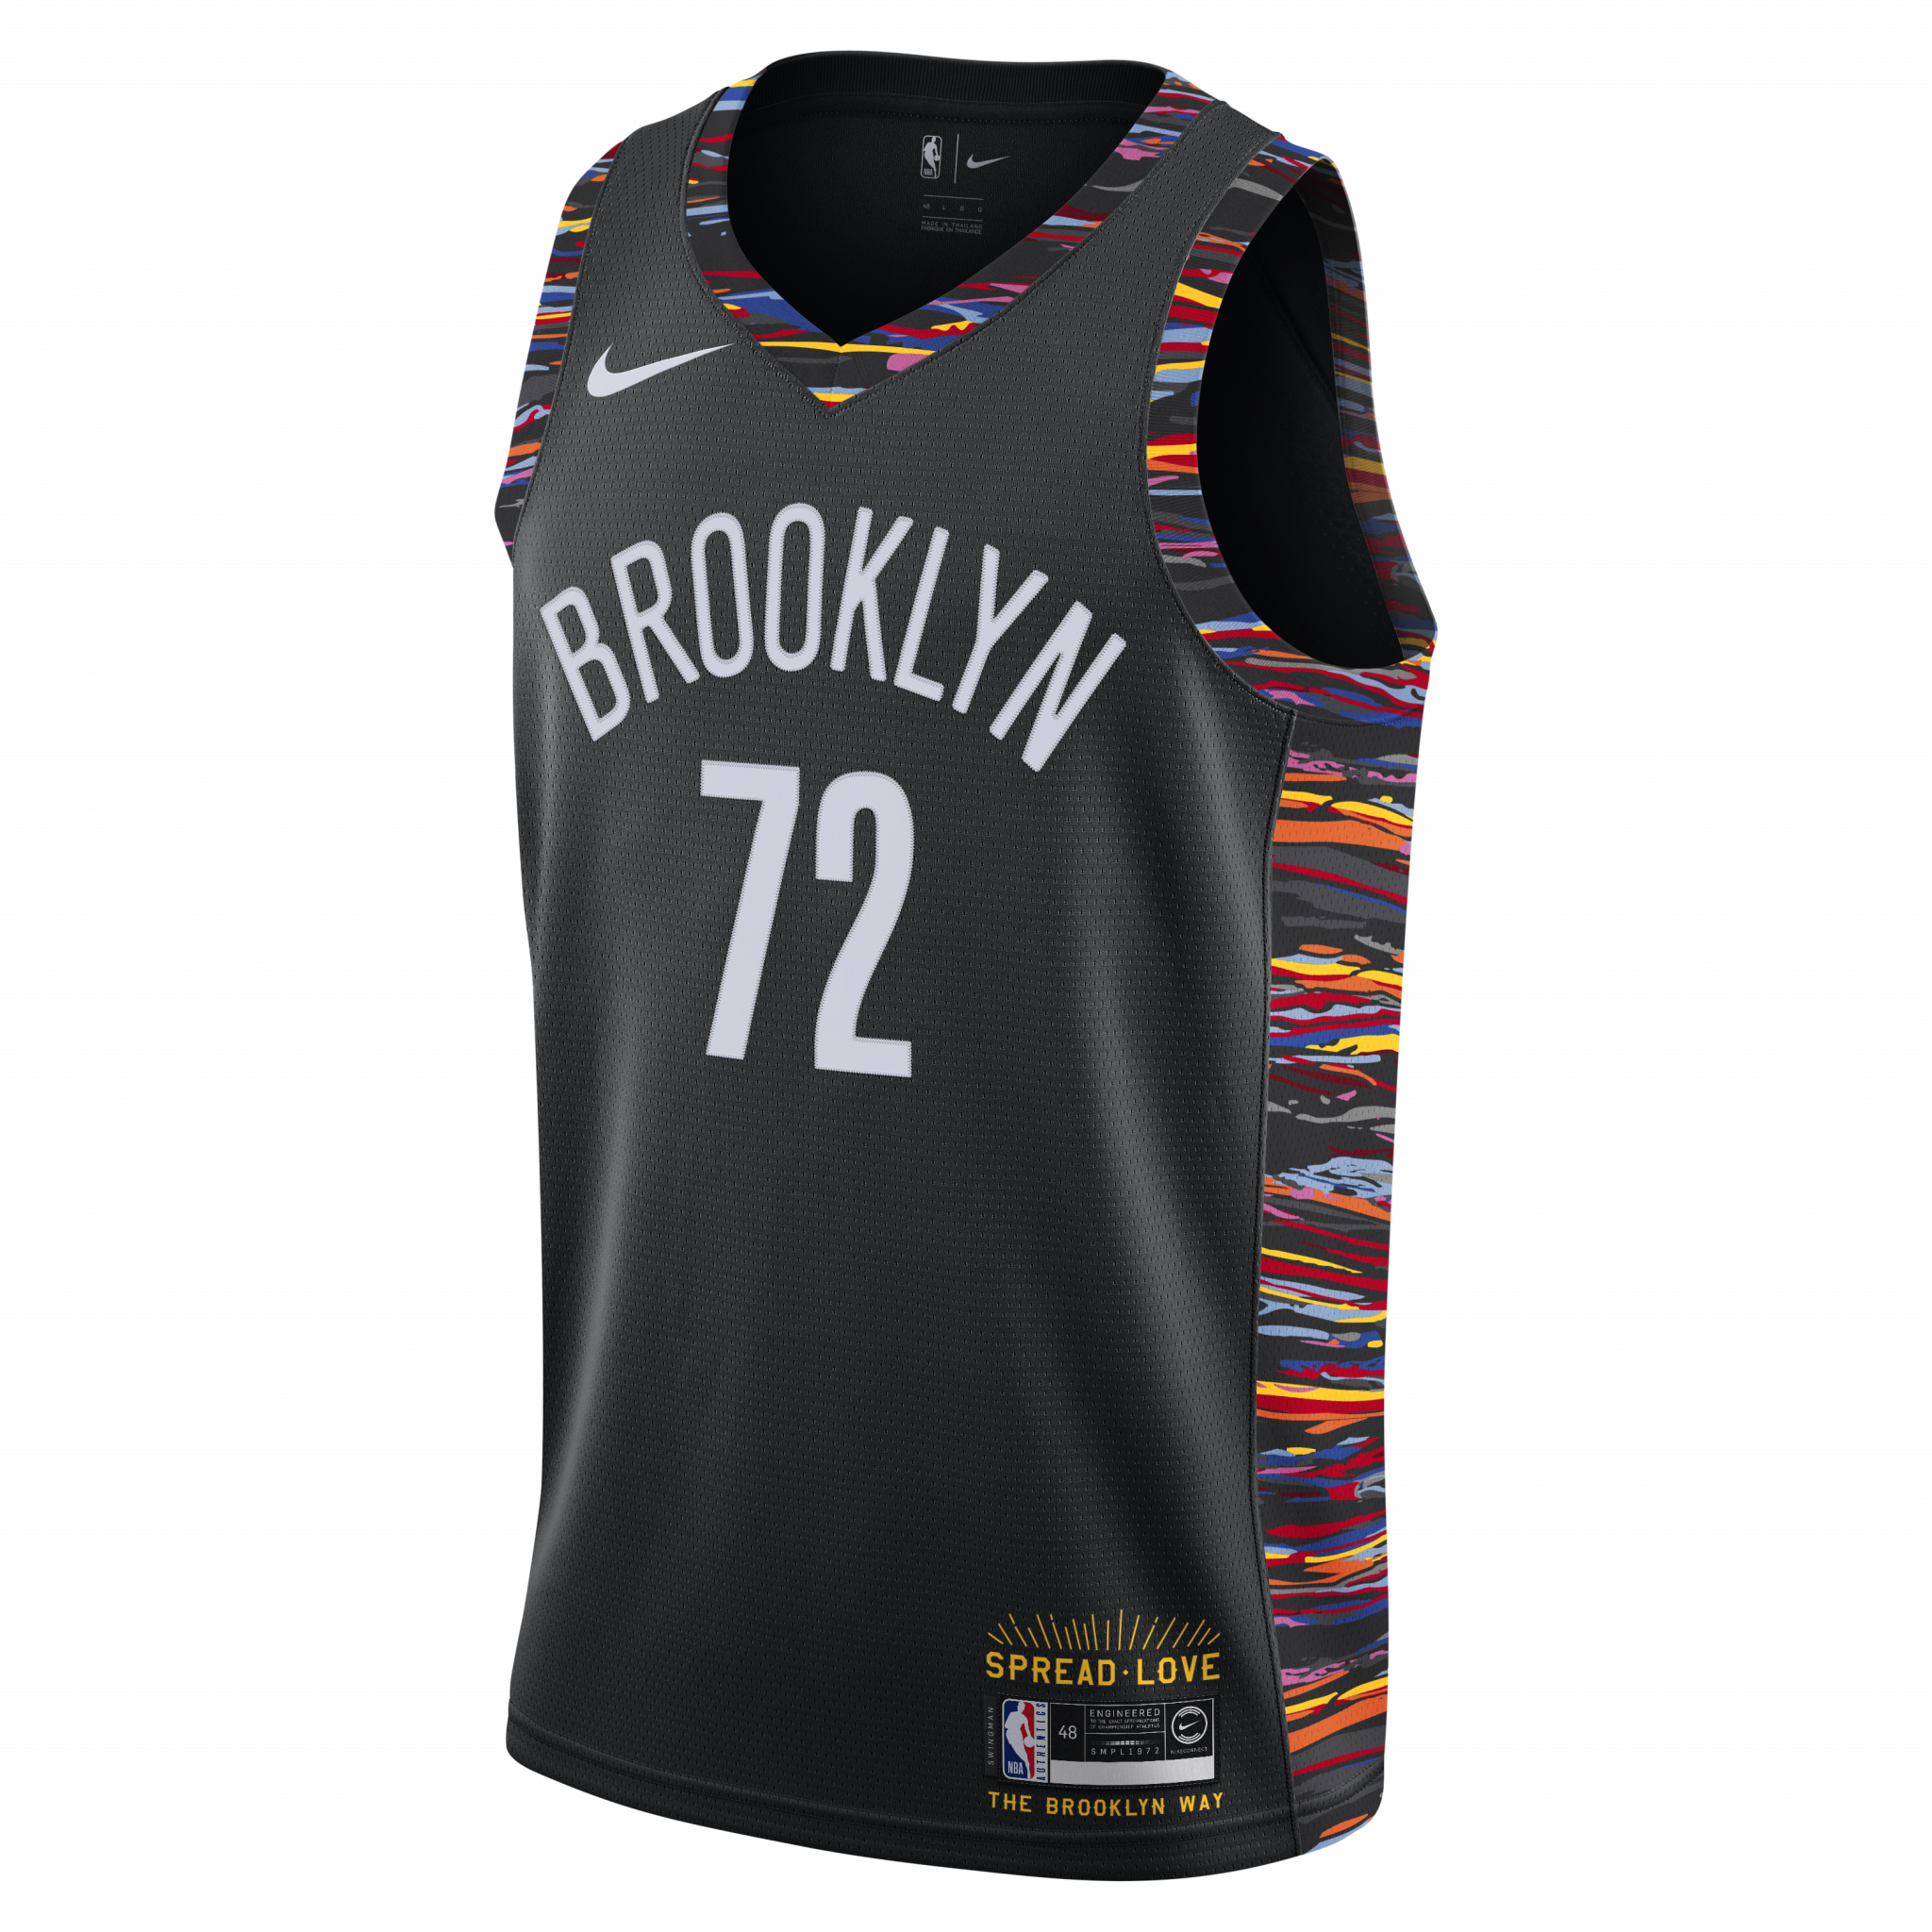 The Brooklyn Nets city edition jersey